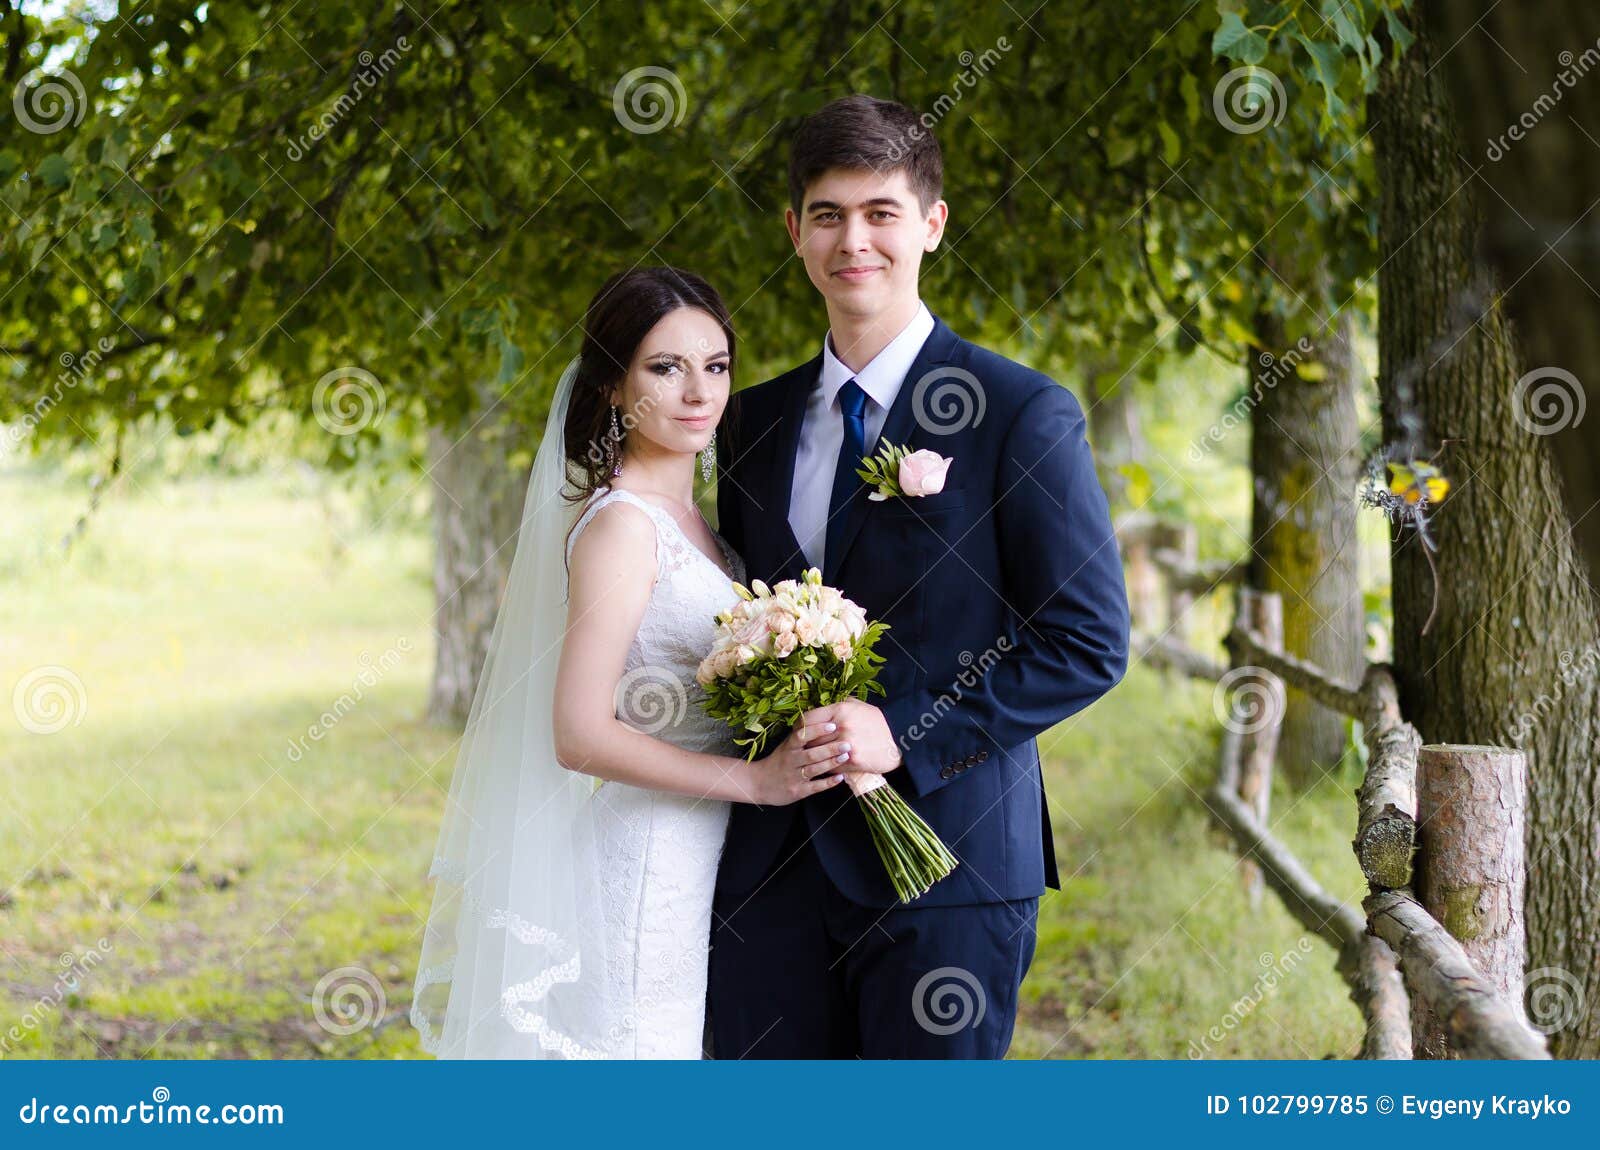 A Beautiful Married Couple in Wedding Dresses, Posing for a Photo Shooting  in an Belarusian Village Near the Fence, with a Wedding Stock Image - Image  of dress, female: 102799785